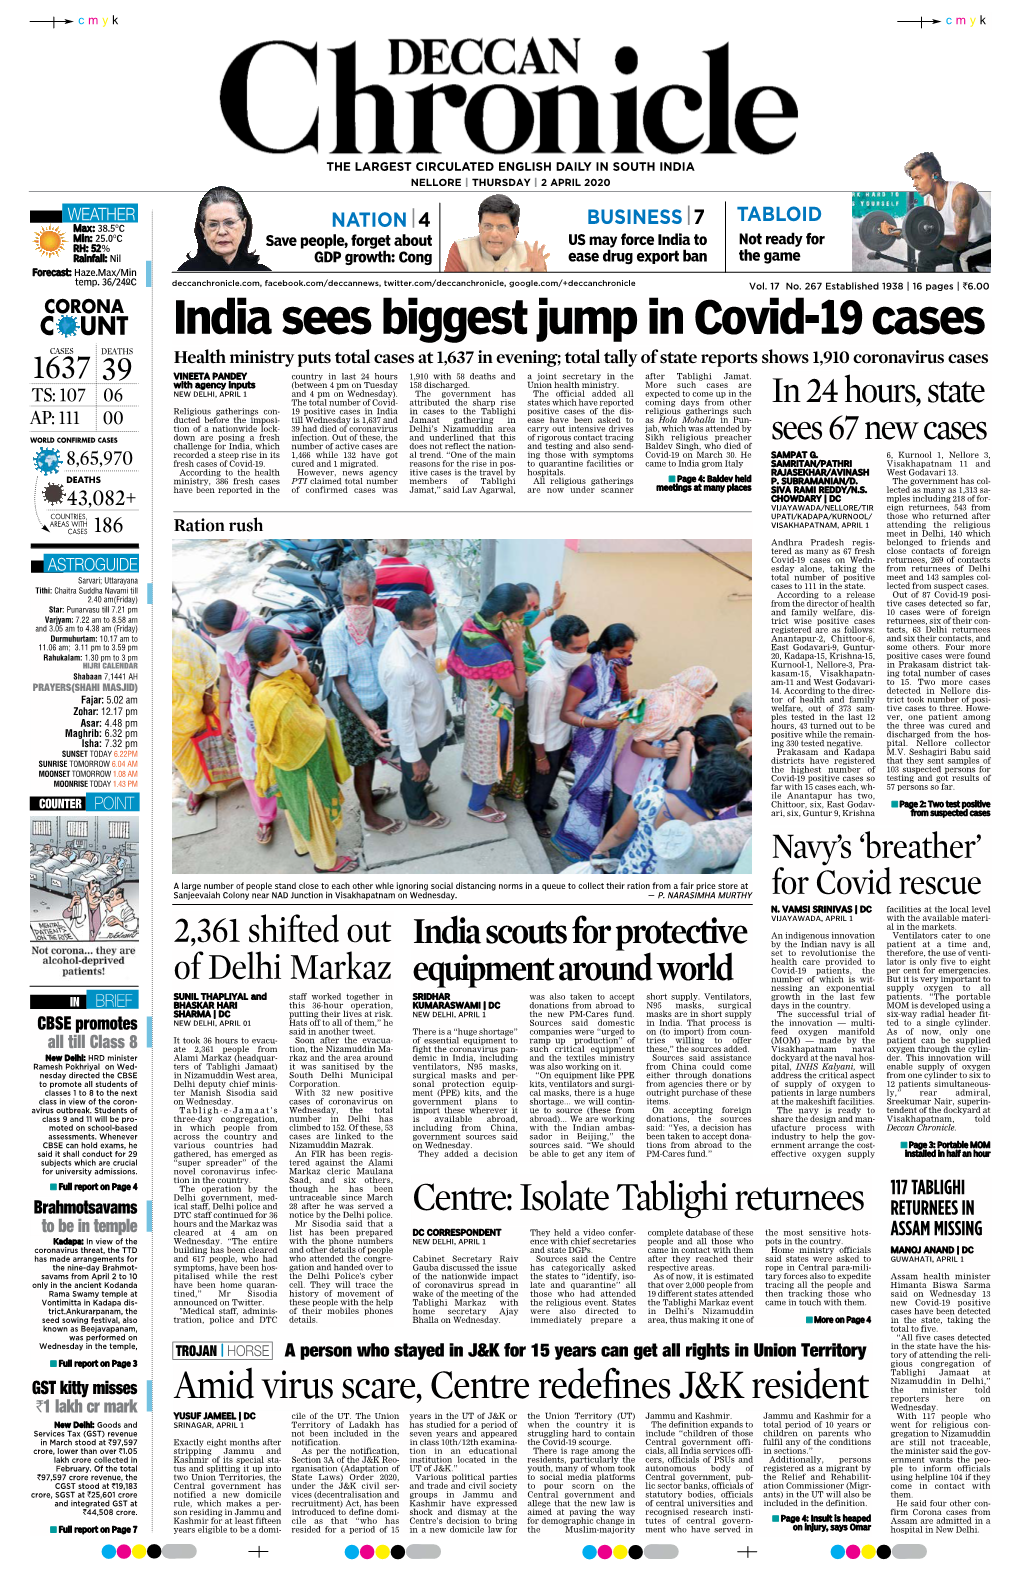 India Sees Biggest Jump in Covid-19 Cases